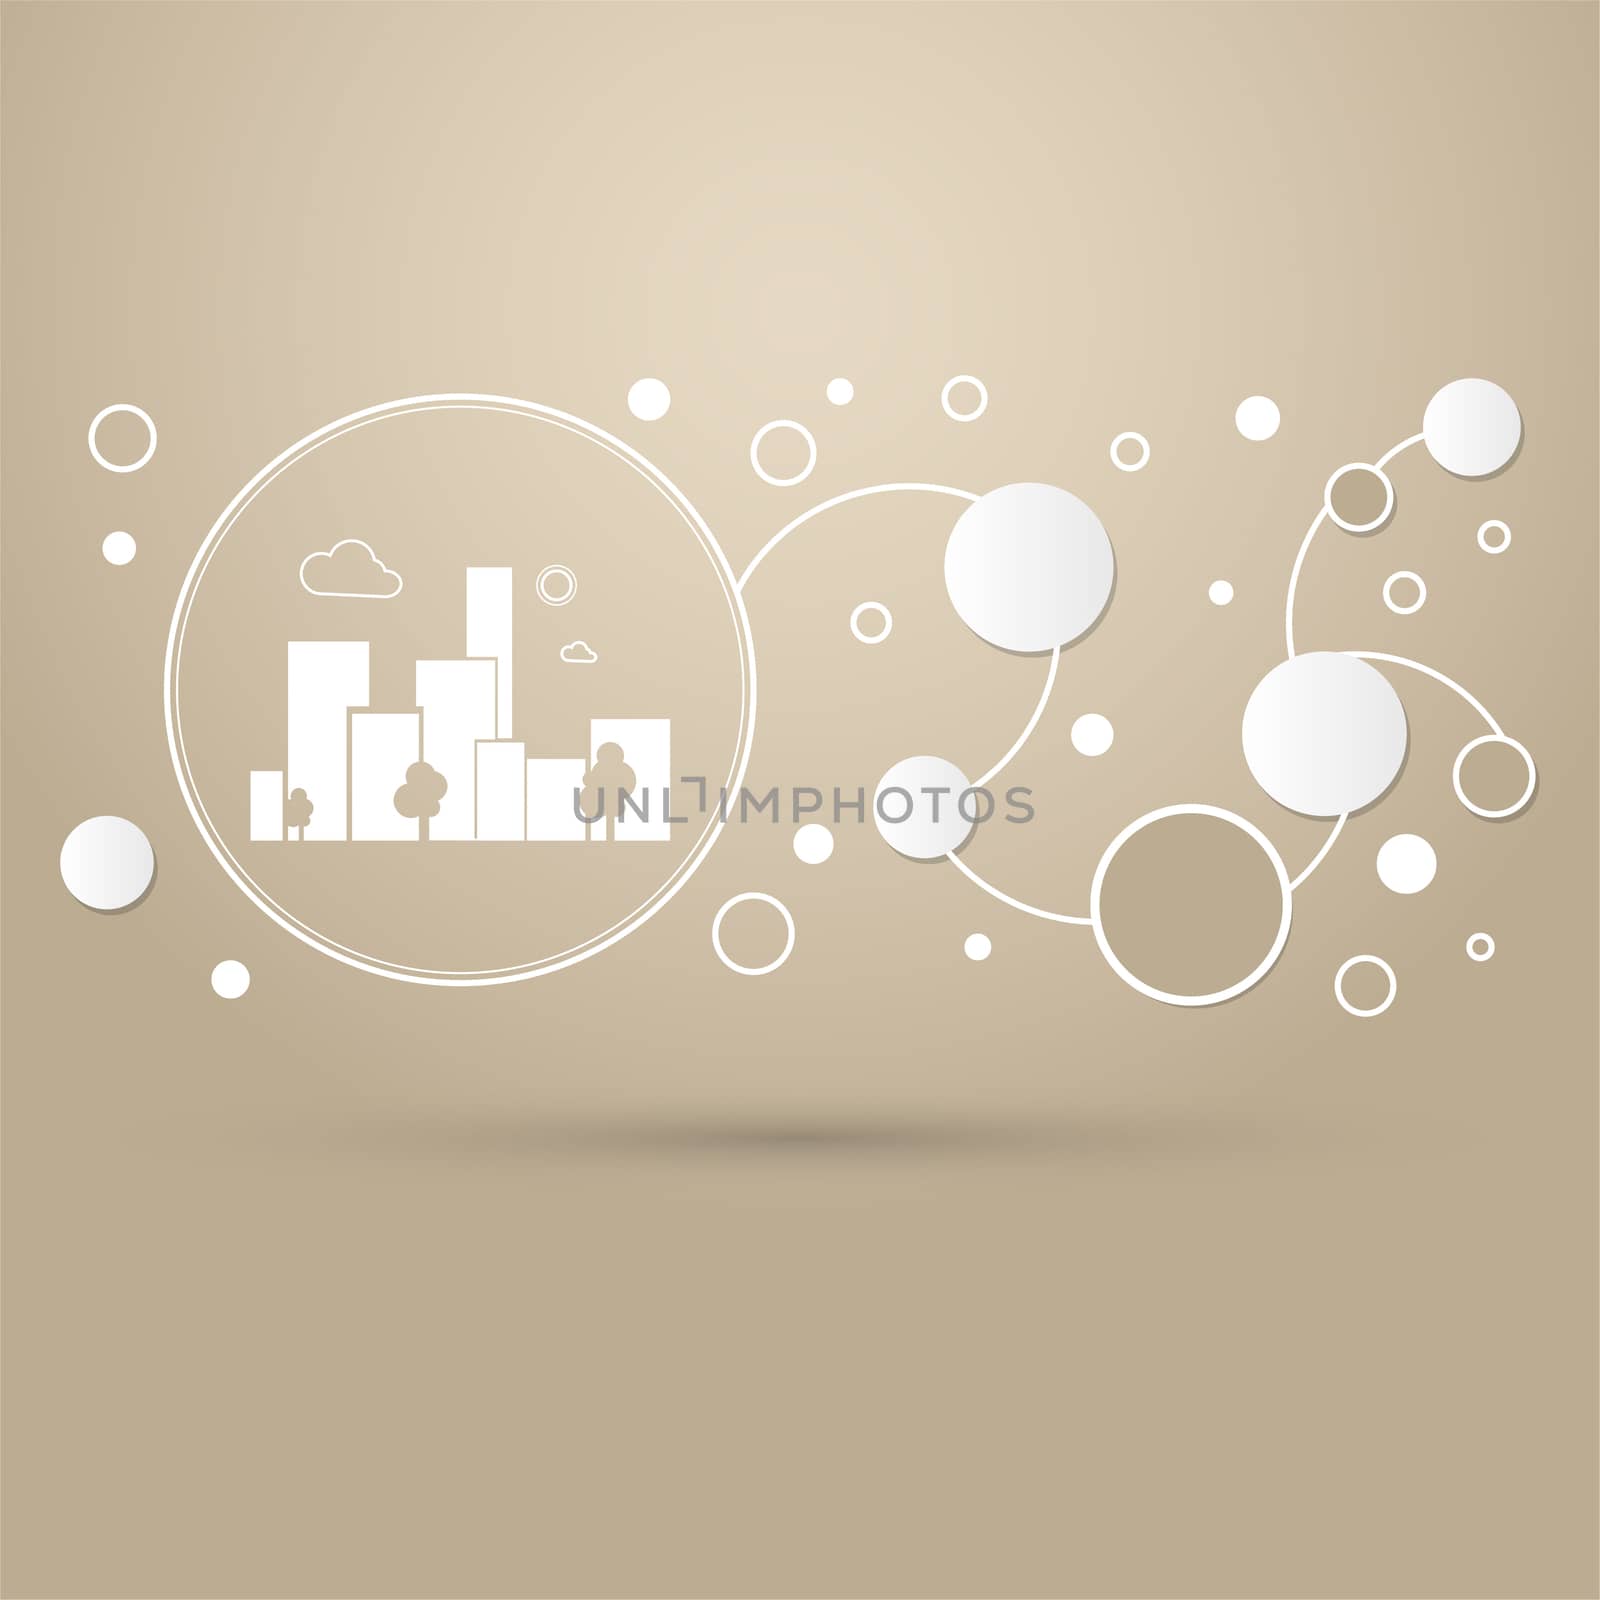 City Icon on a brown background with elegant style and modern design infographic. illustration